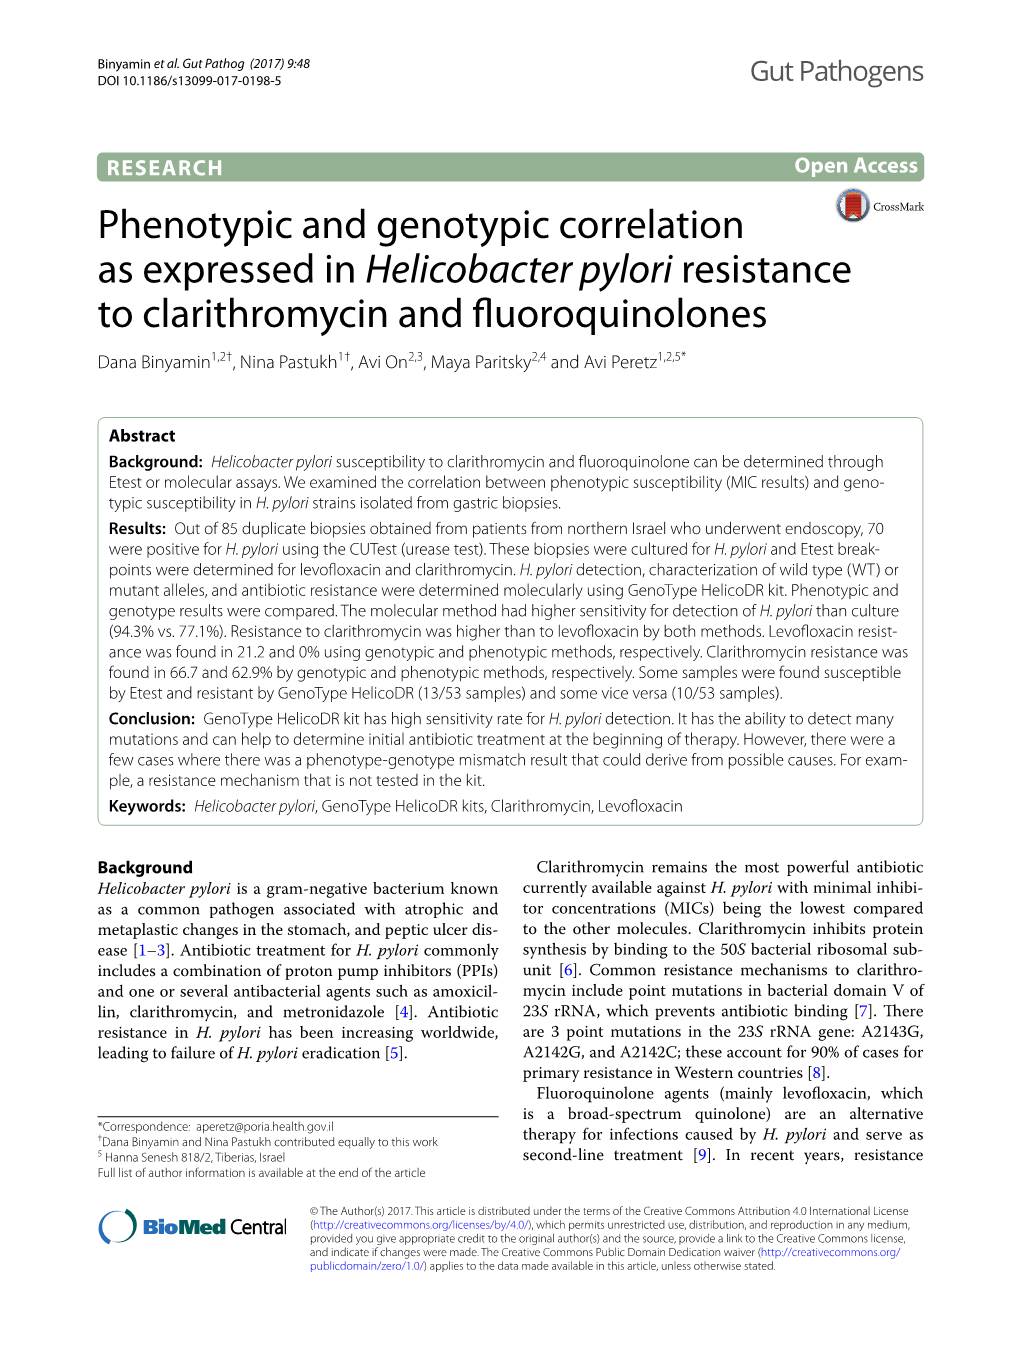 Phenotypic and Genotypic Correlation As Expressed In